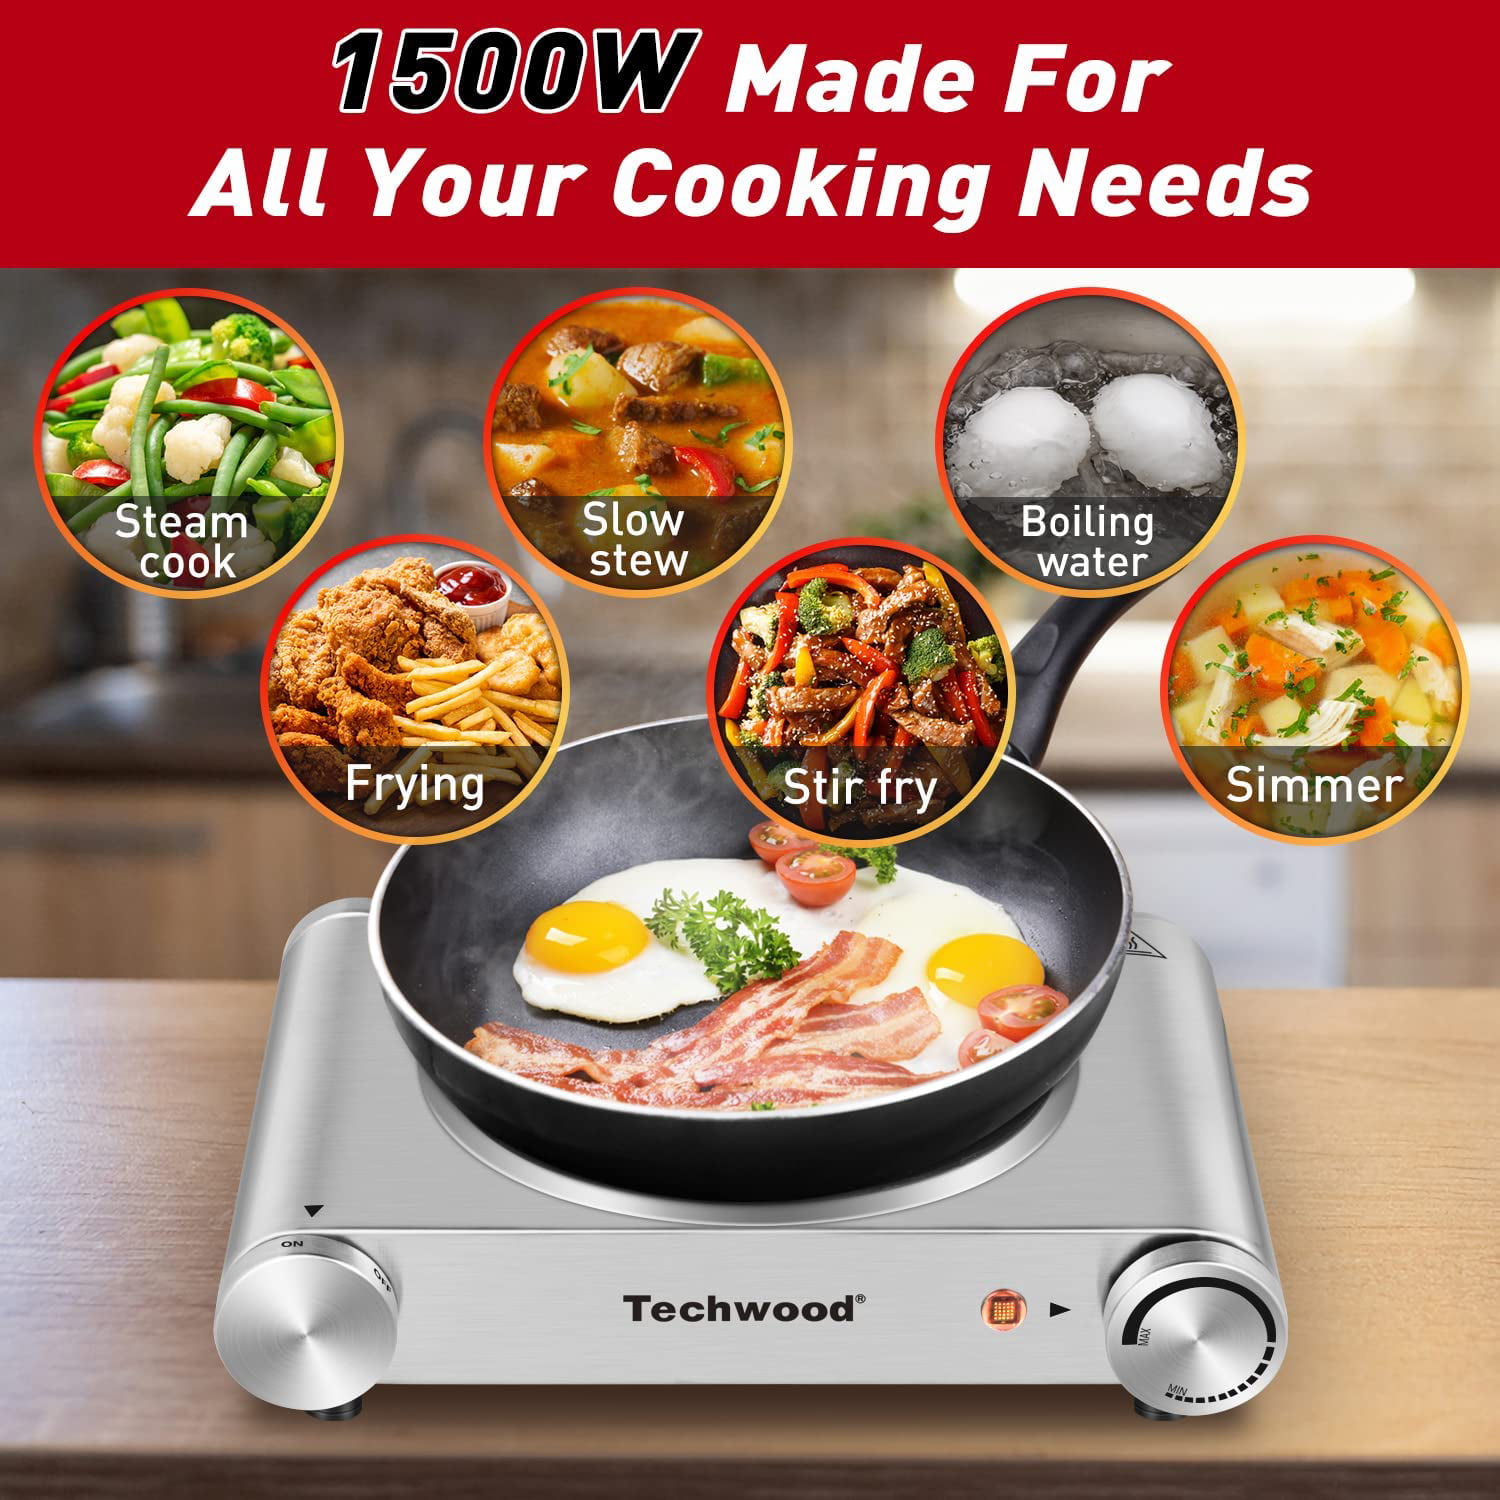  Electric Stovetop Cooking Hot Plate 1200W Infrared 7.3/4 Glass  Ceramic Portable Stove Burners Cool Touch Handle Single Cooktop Keeps Food  Warm Temperature Controls Electric Burner for Kitchen, Dorm : Appliances